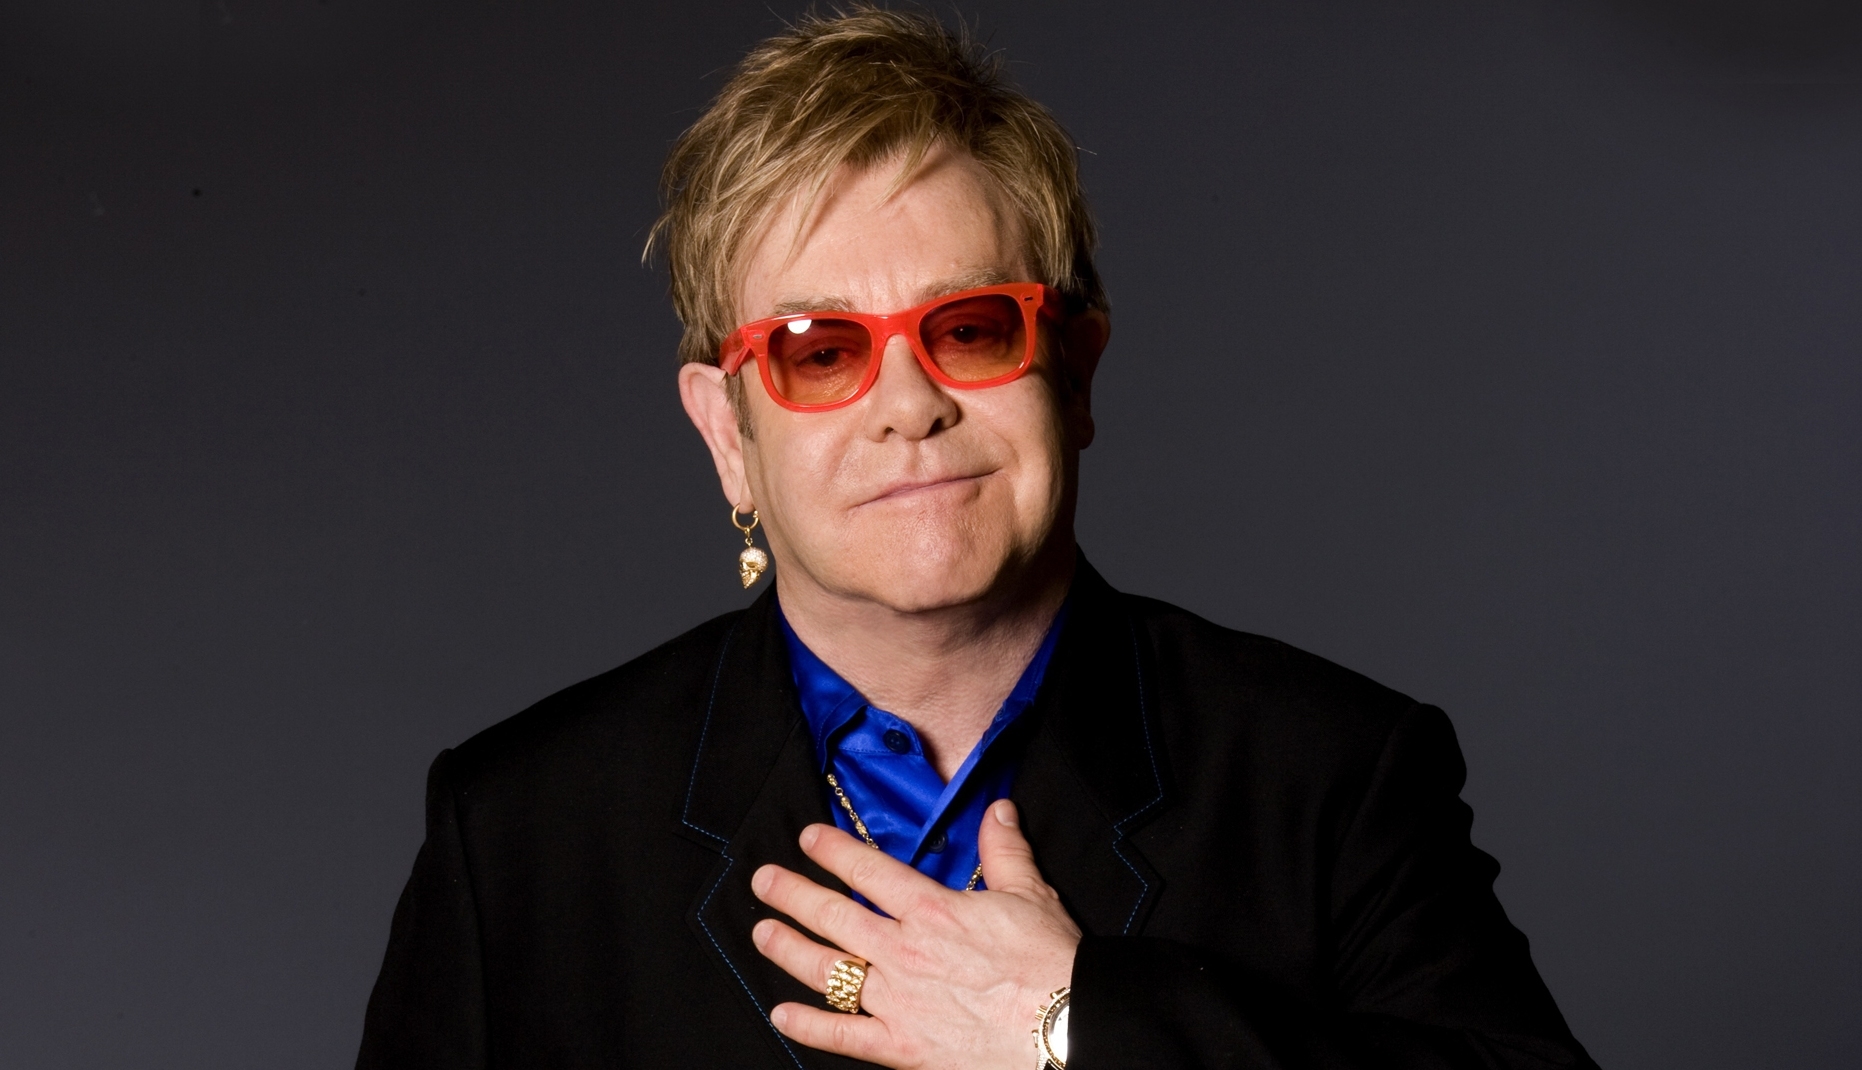 Elton John’s ‘Farewell Yellow Brick Road’ Tour Becomes The Highest-Grossing Tour In History